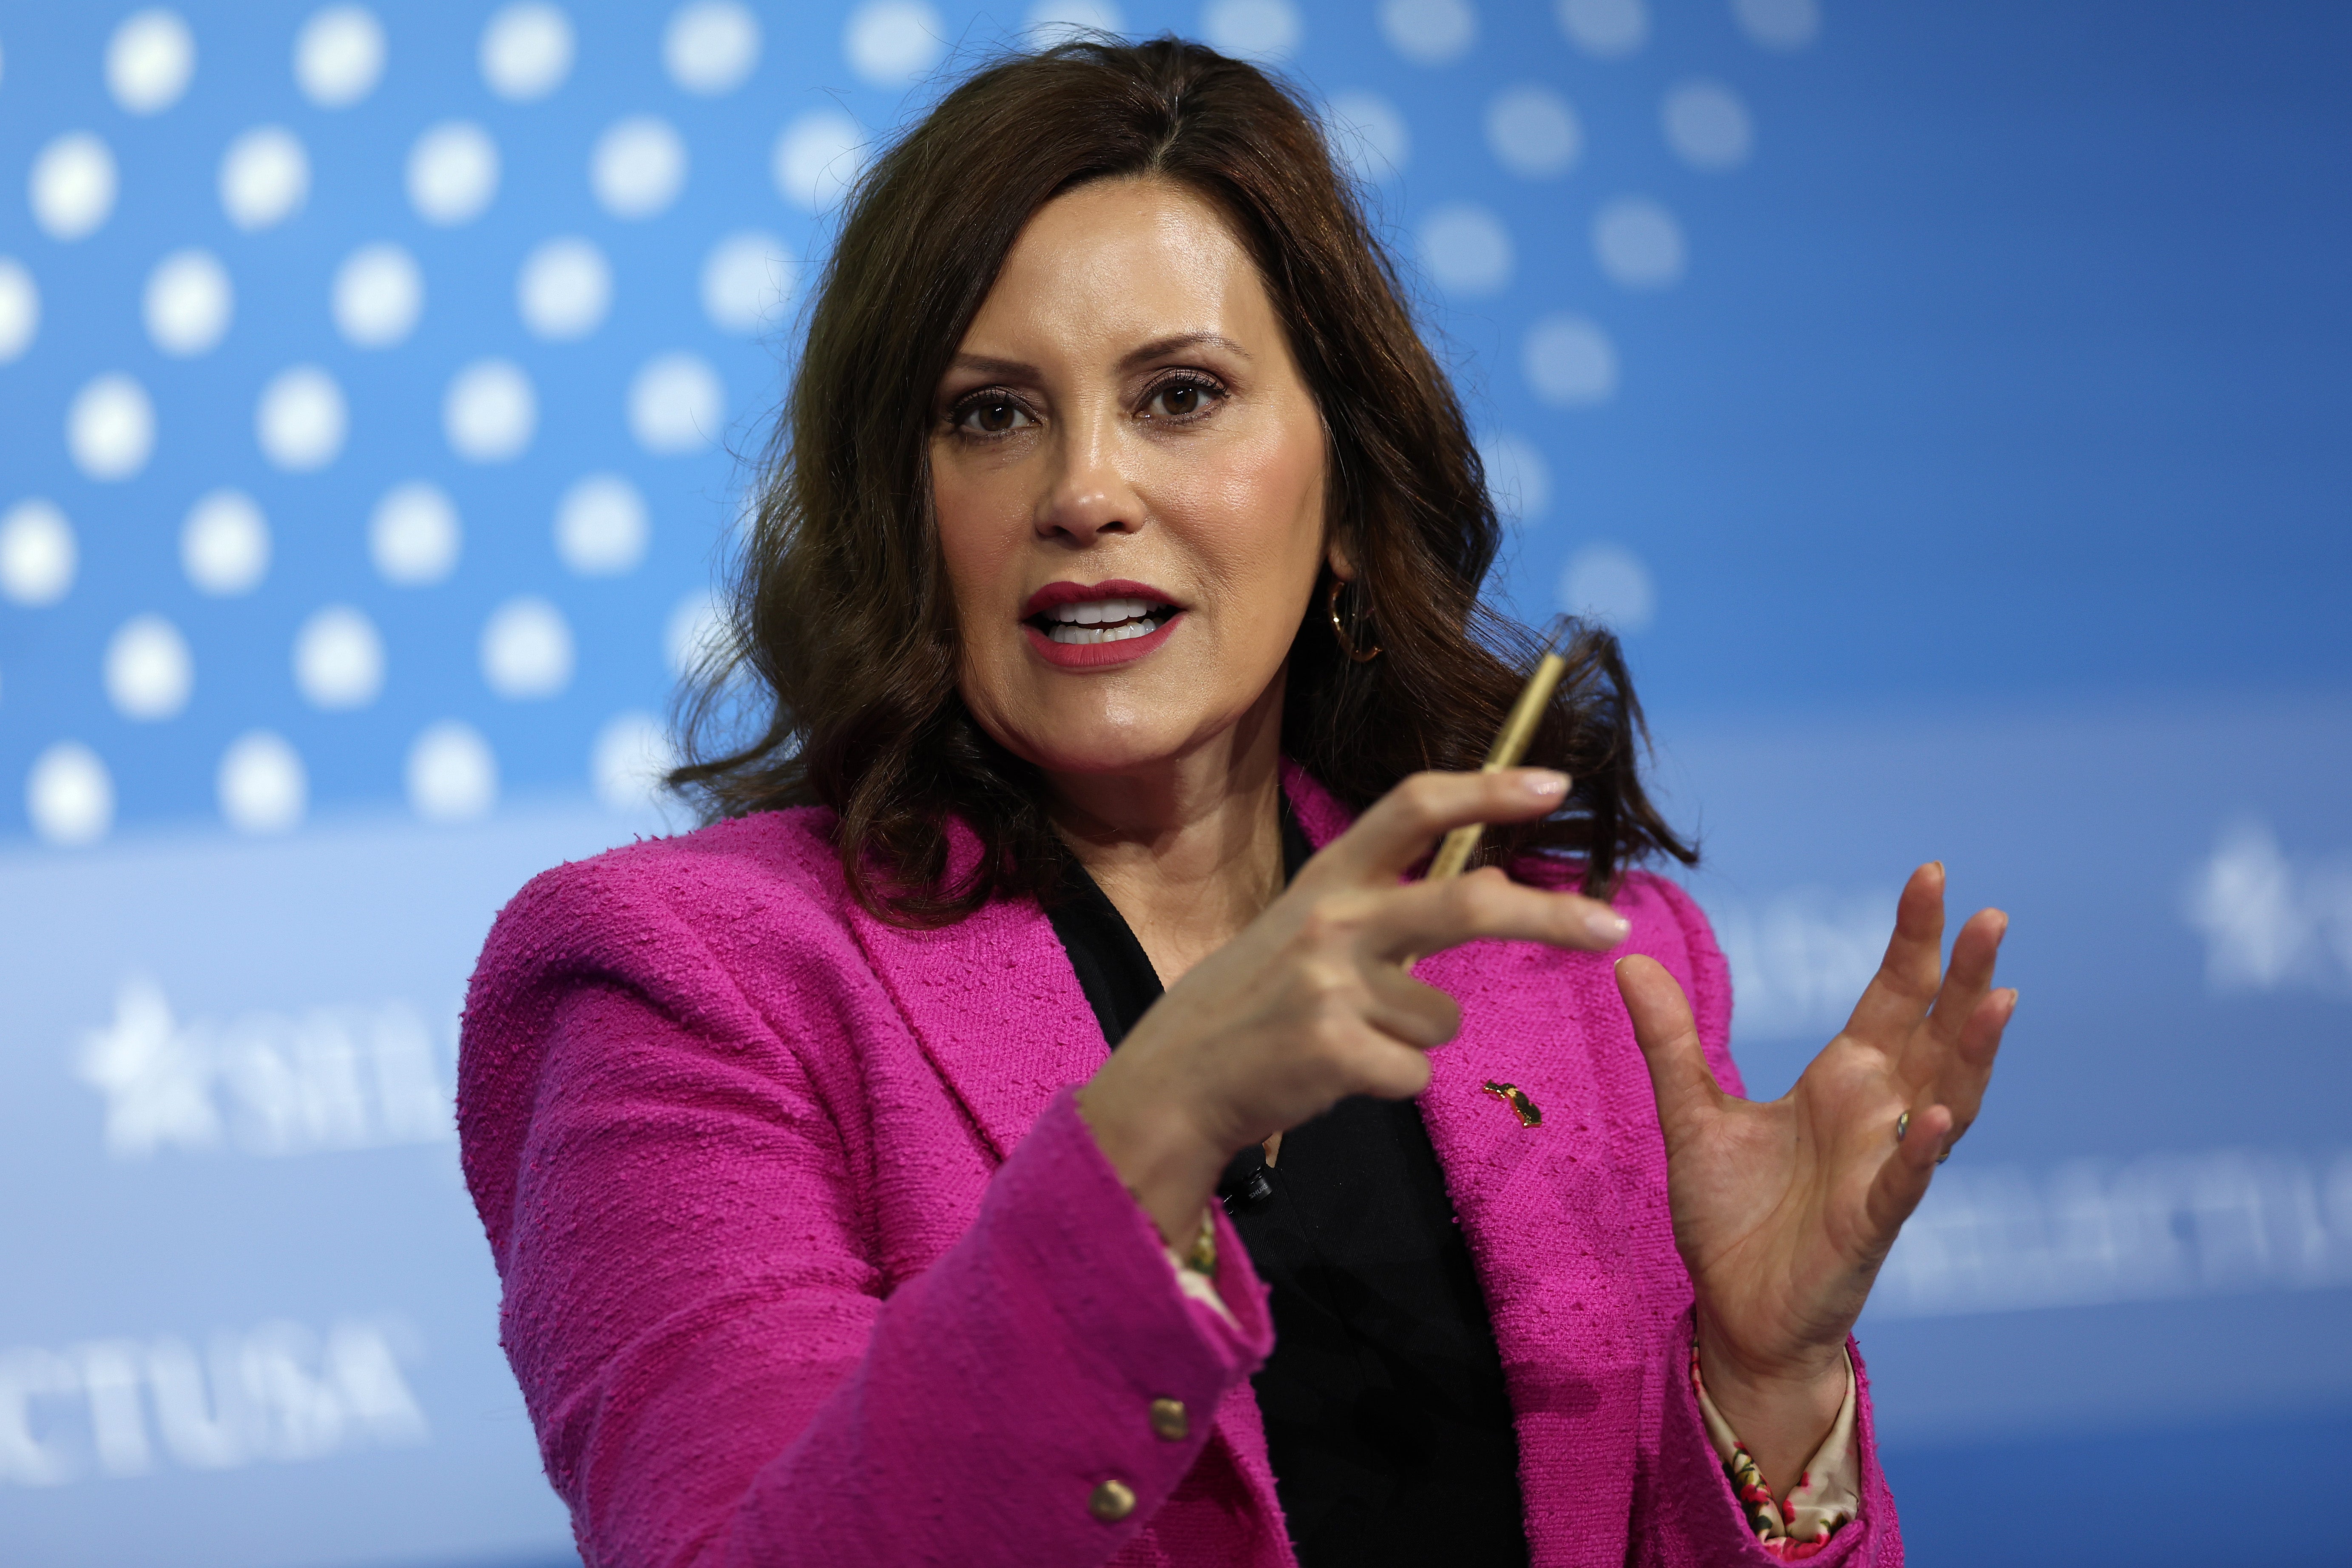 Governor Gretchen Whitmer (D-MI) has scoffed at the idea she would replace Biden